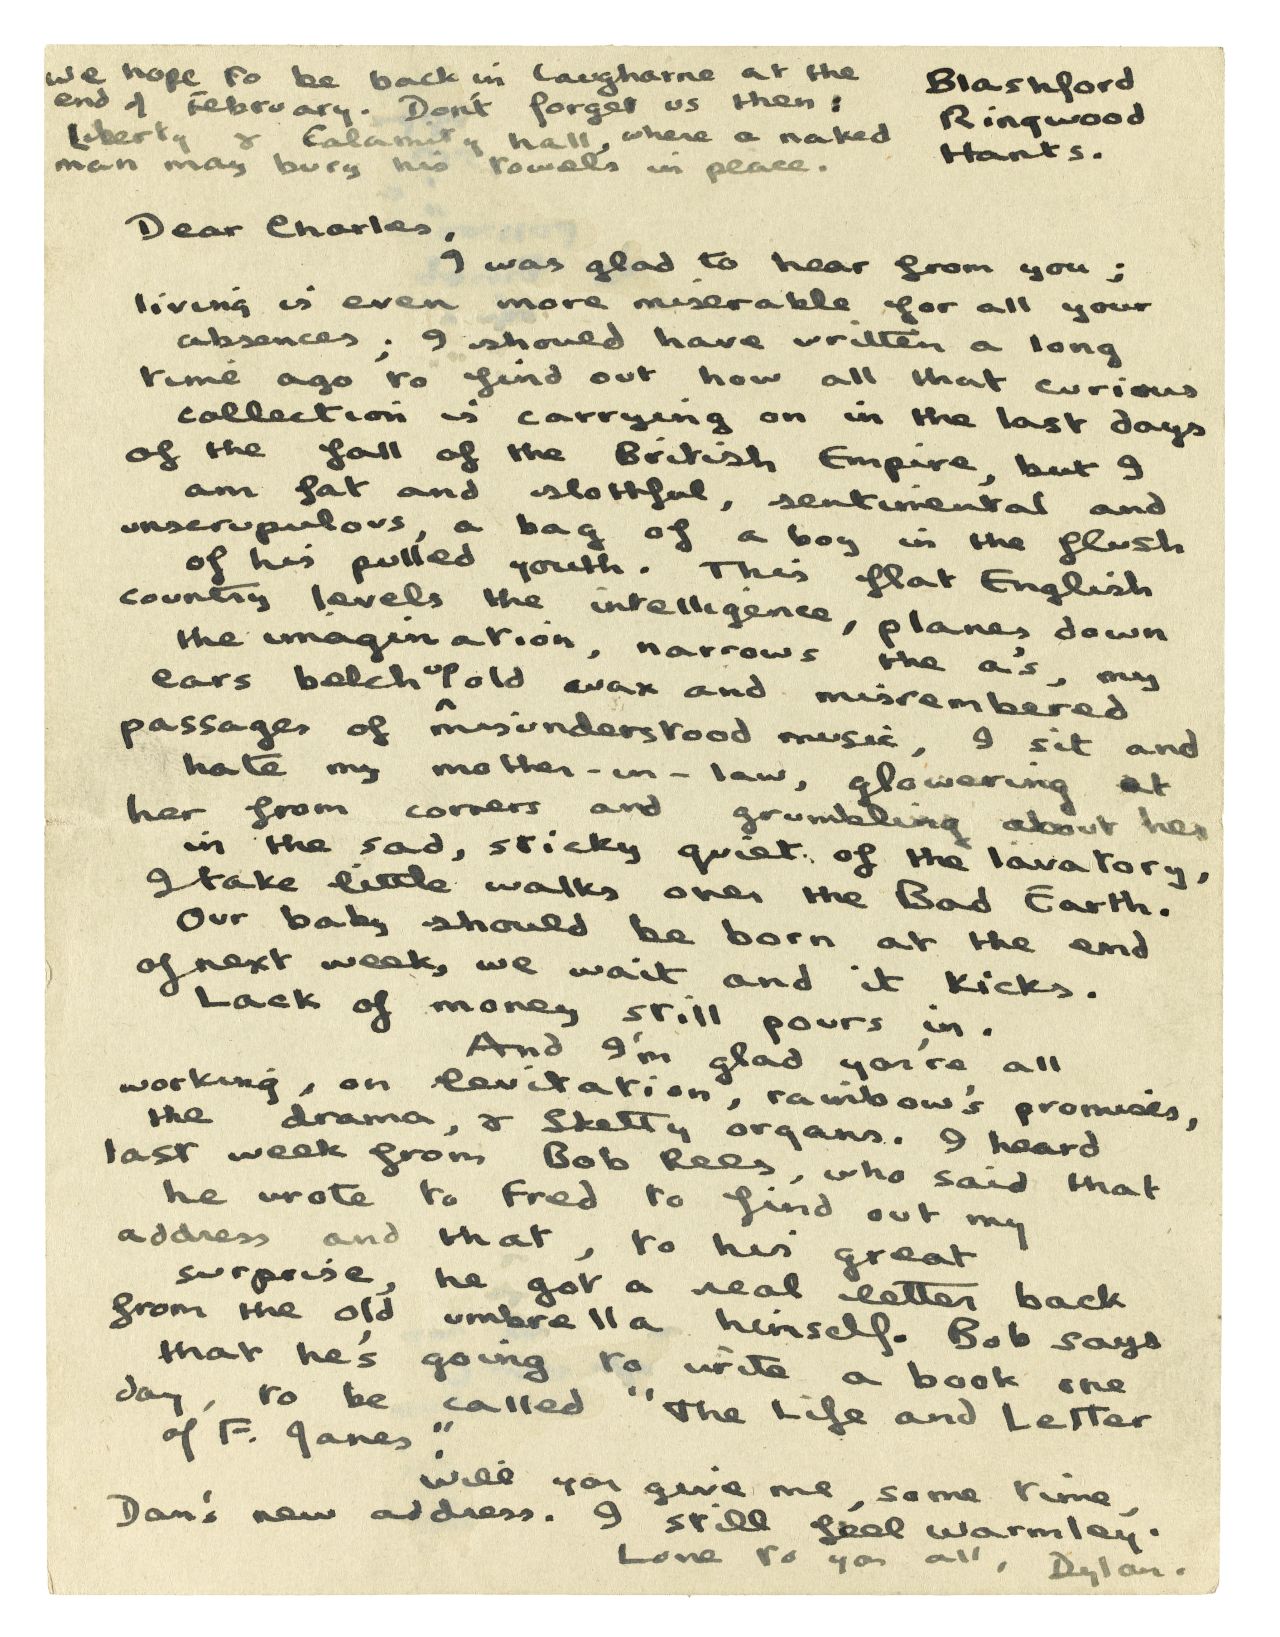 A letter from Thomas, which accompanies the notebook, explains how much he disliked spending time with his wife's family in in southern England: "This flat English country levels the intelligence, planes down the imagination ... I sit and hate my mother-in-law, glowering at her from corners and grumbling about her in the sad, sticky, quiet of the lavatory."